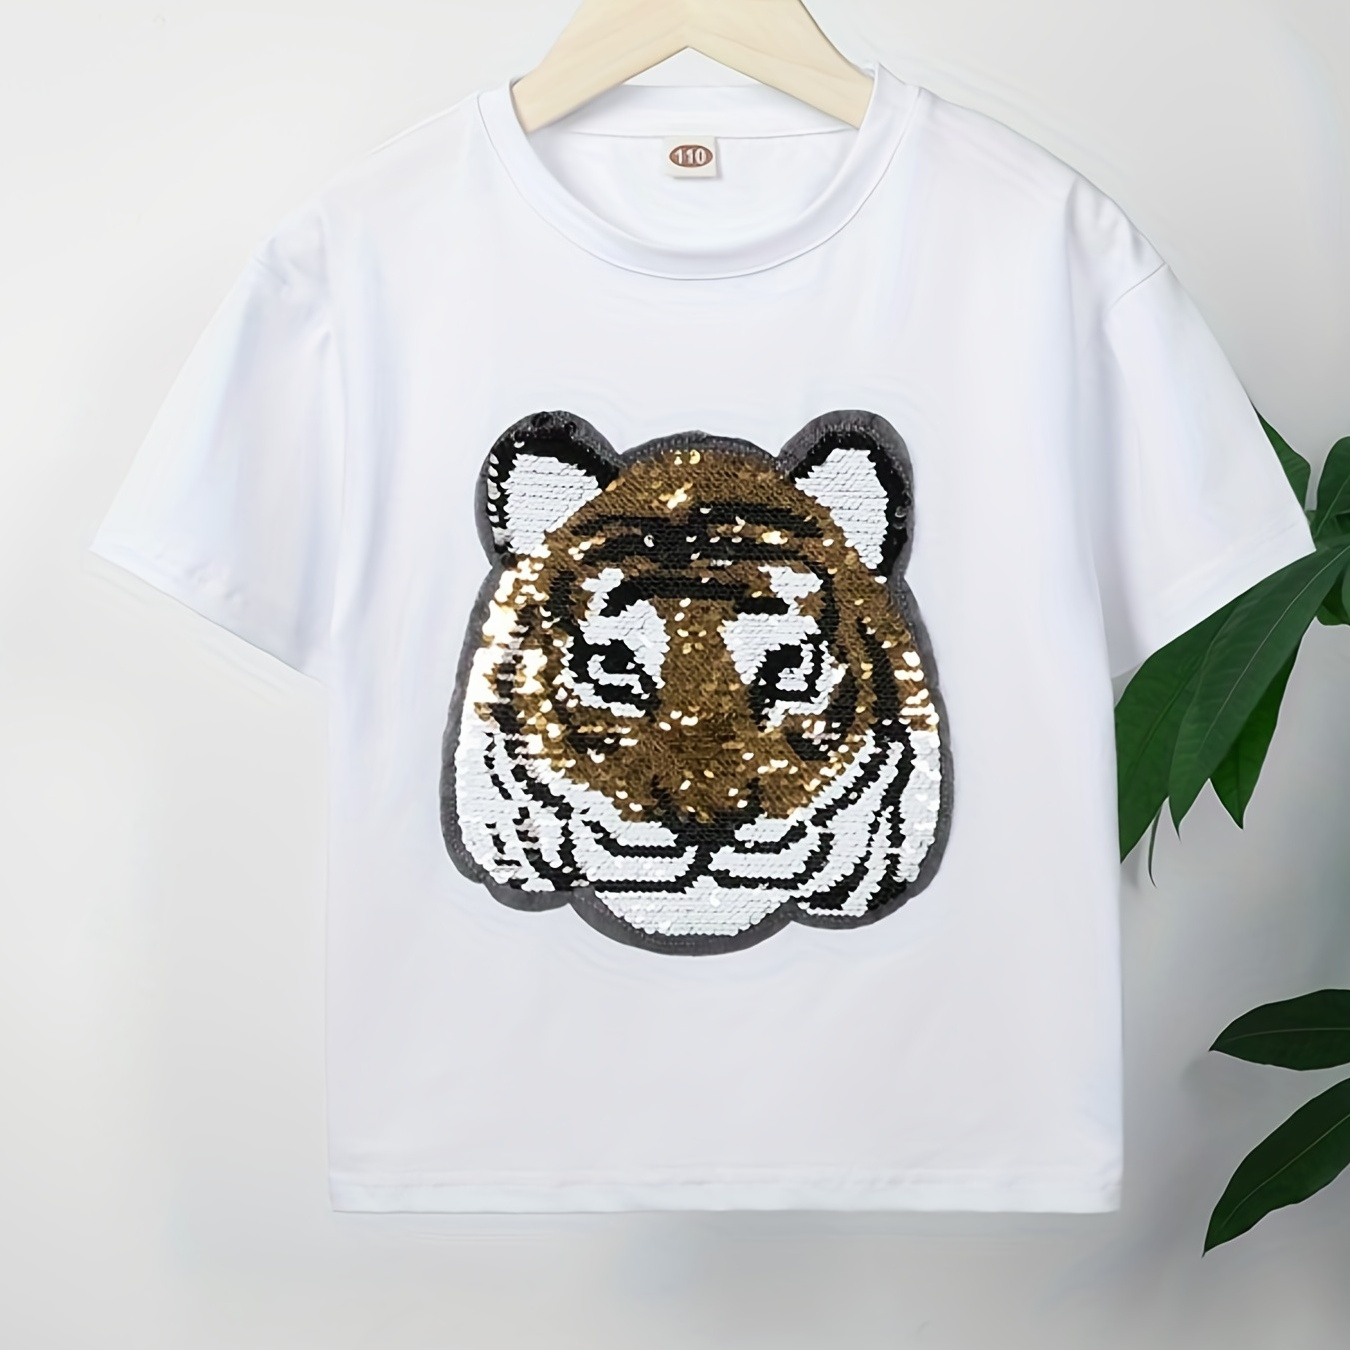 

Fancy Sequin Tiger Pattern Boys Crew Neck T-shirt Lighweight & Comfortable Fit Short Sleeve Tee Top For Youth Kid